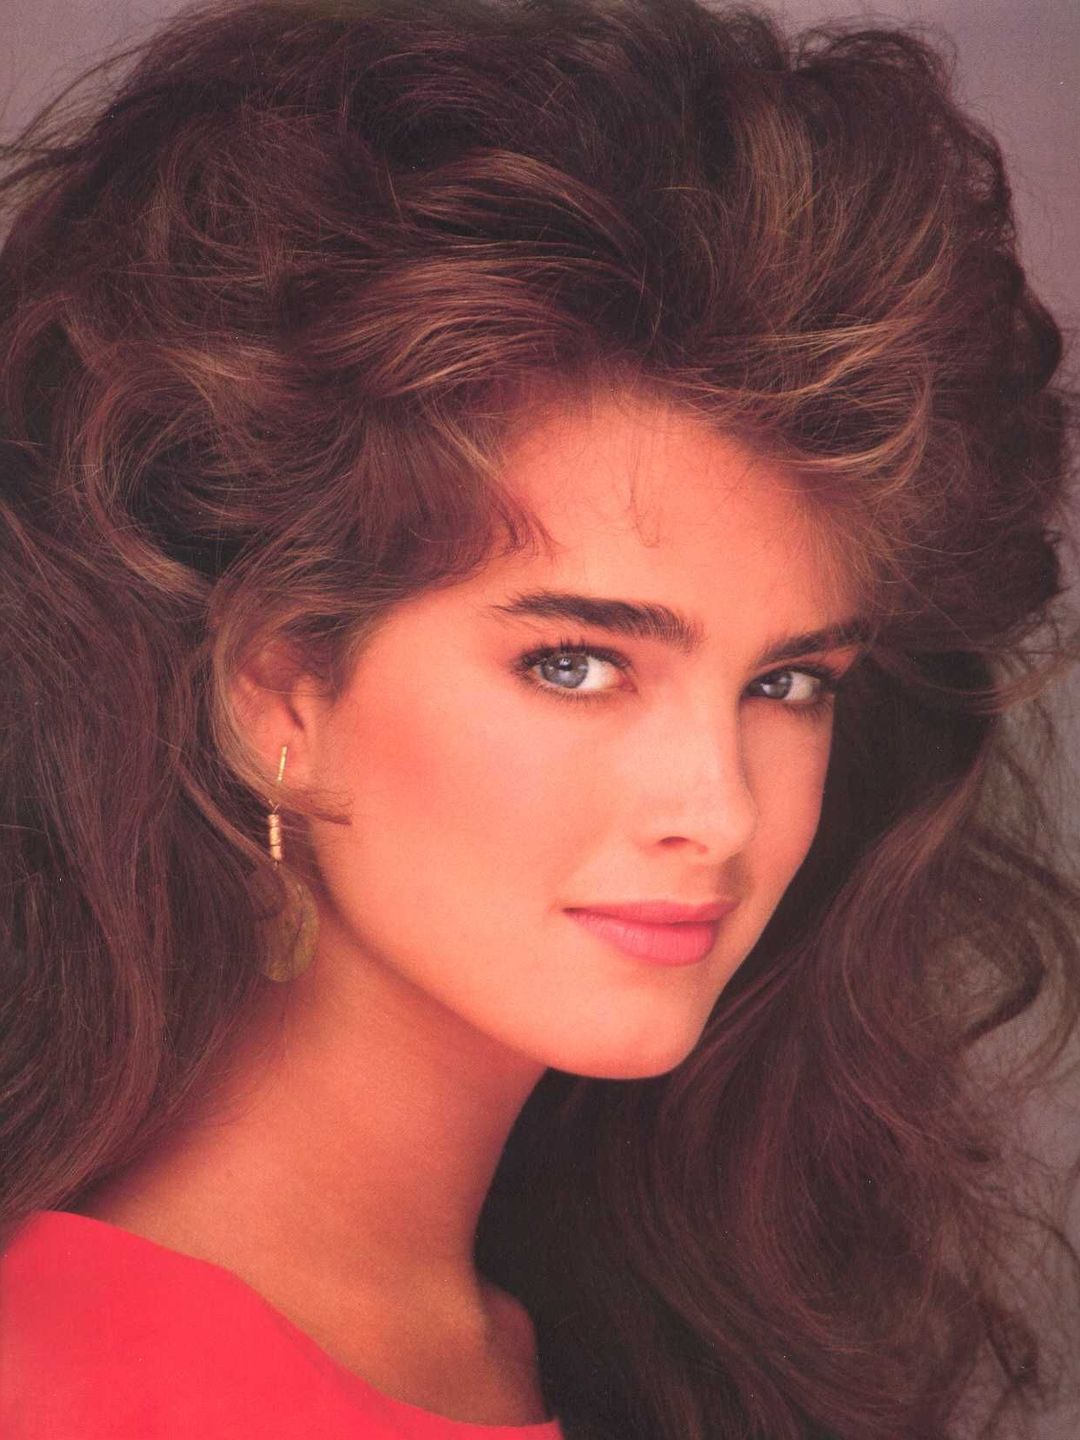 Brooke Shields how did she became famous